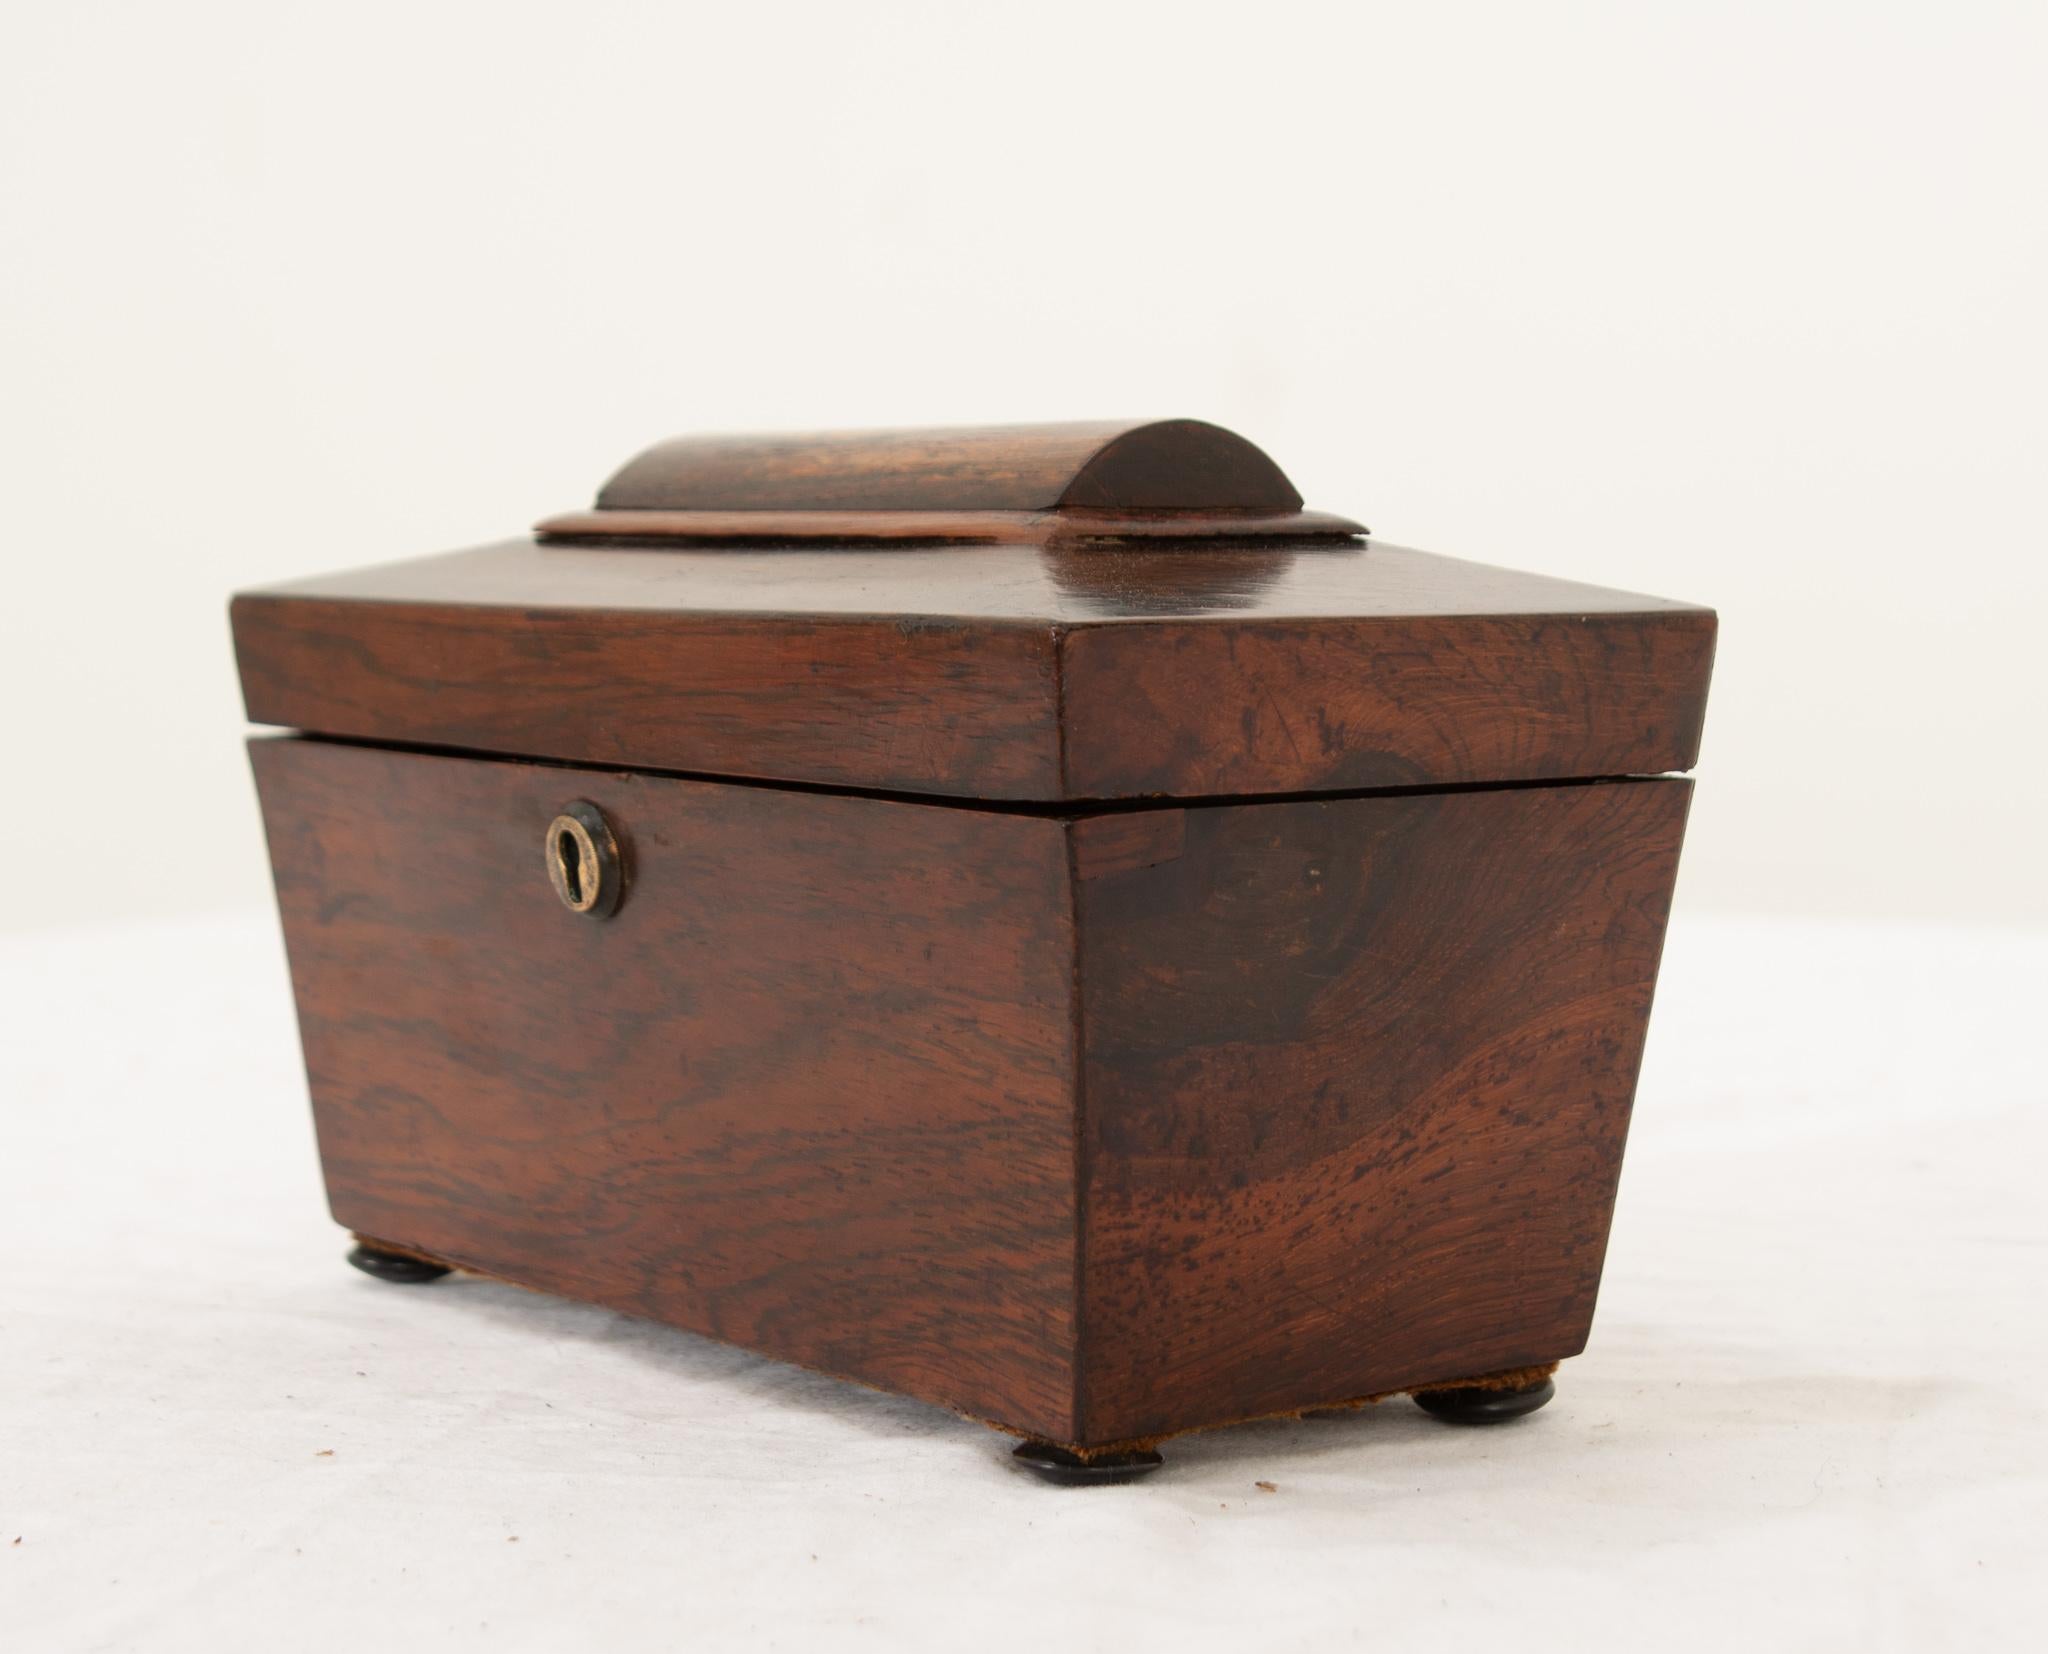 An English 19th Century mahogany tea caddy having a beautifully molded and trimmed lift up top opening to reveal two mahogany lift off lids with lovely turned wooden pulls that open two roomy tea compartments. The top is lined with the original